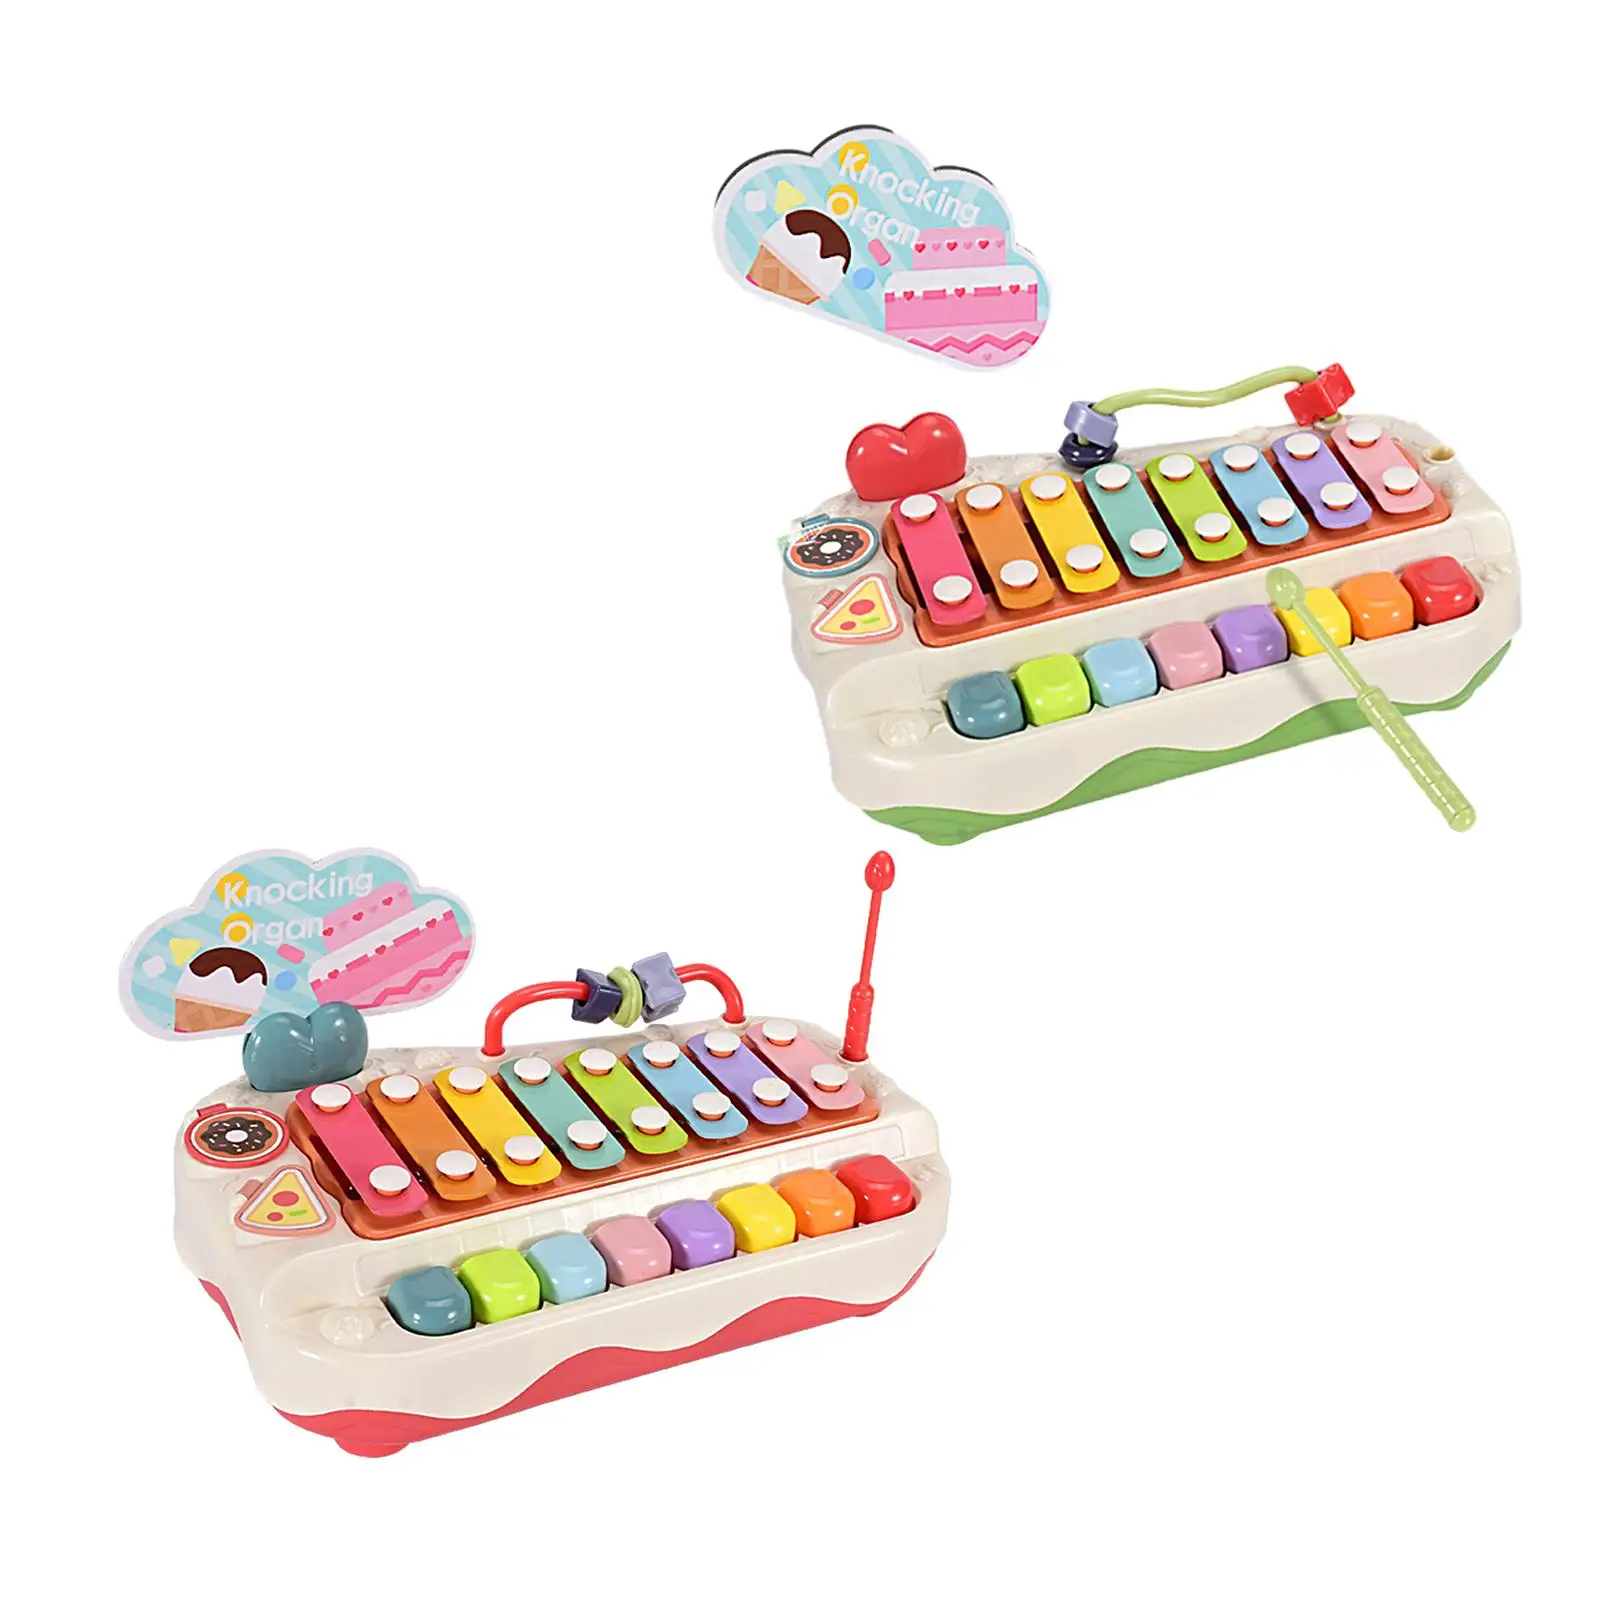 Baby Musical Toy Montessori Preschool Educational Motor Skills Colorful Piano Toy for Kids 3+ Baby Boy Girls Toddler Gifts